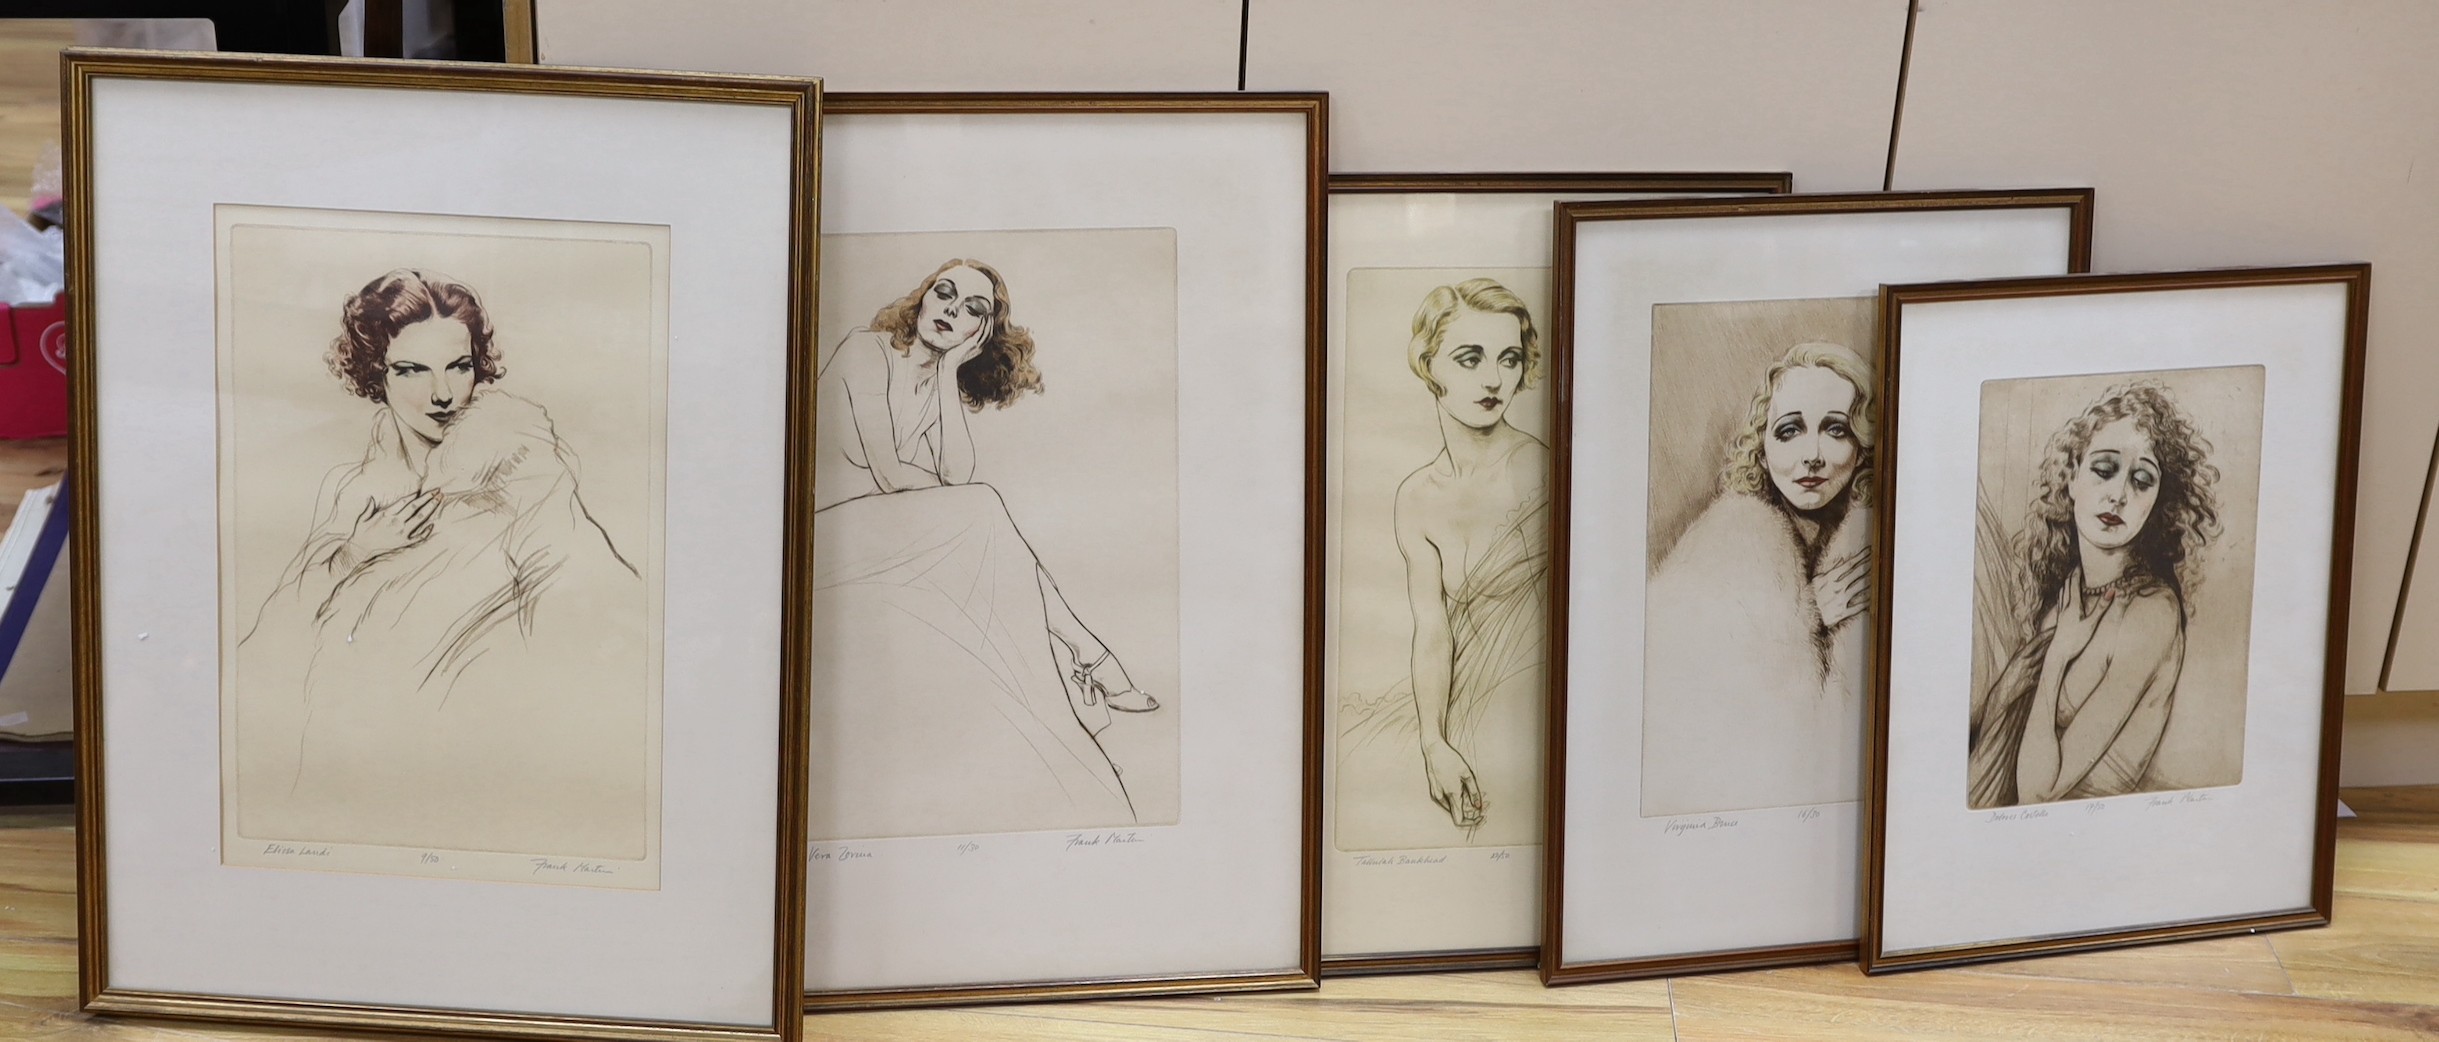 Frank Martin (1921-2005), five limited edition prints, Portraits of Vera Zorina, Elissa Landi, Dolores Costello, Tallulah Bankhead and Virgina Bruce, all signed in pencil and numbered from edition of 30 or 50, largest 44